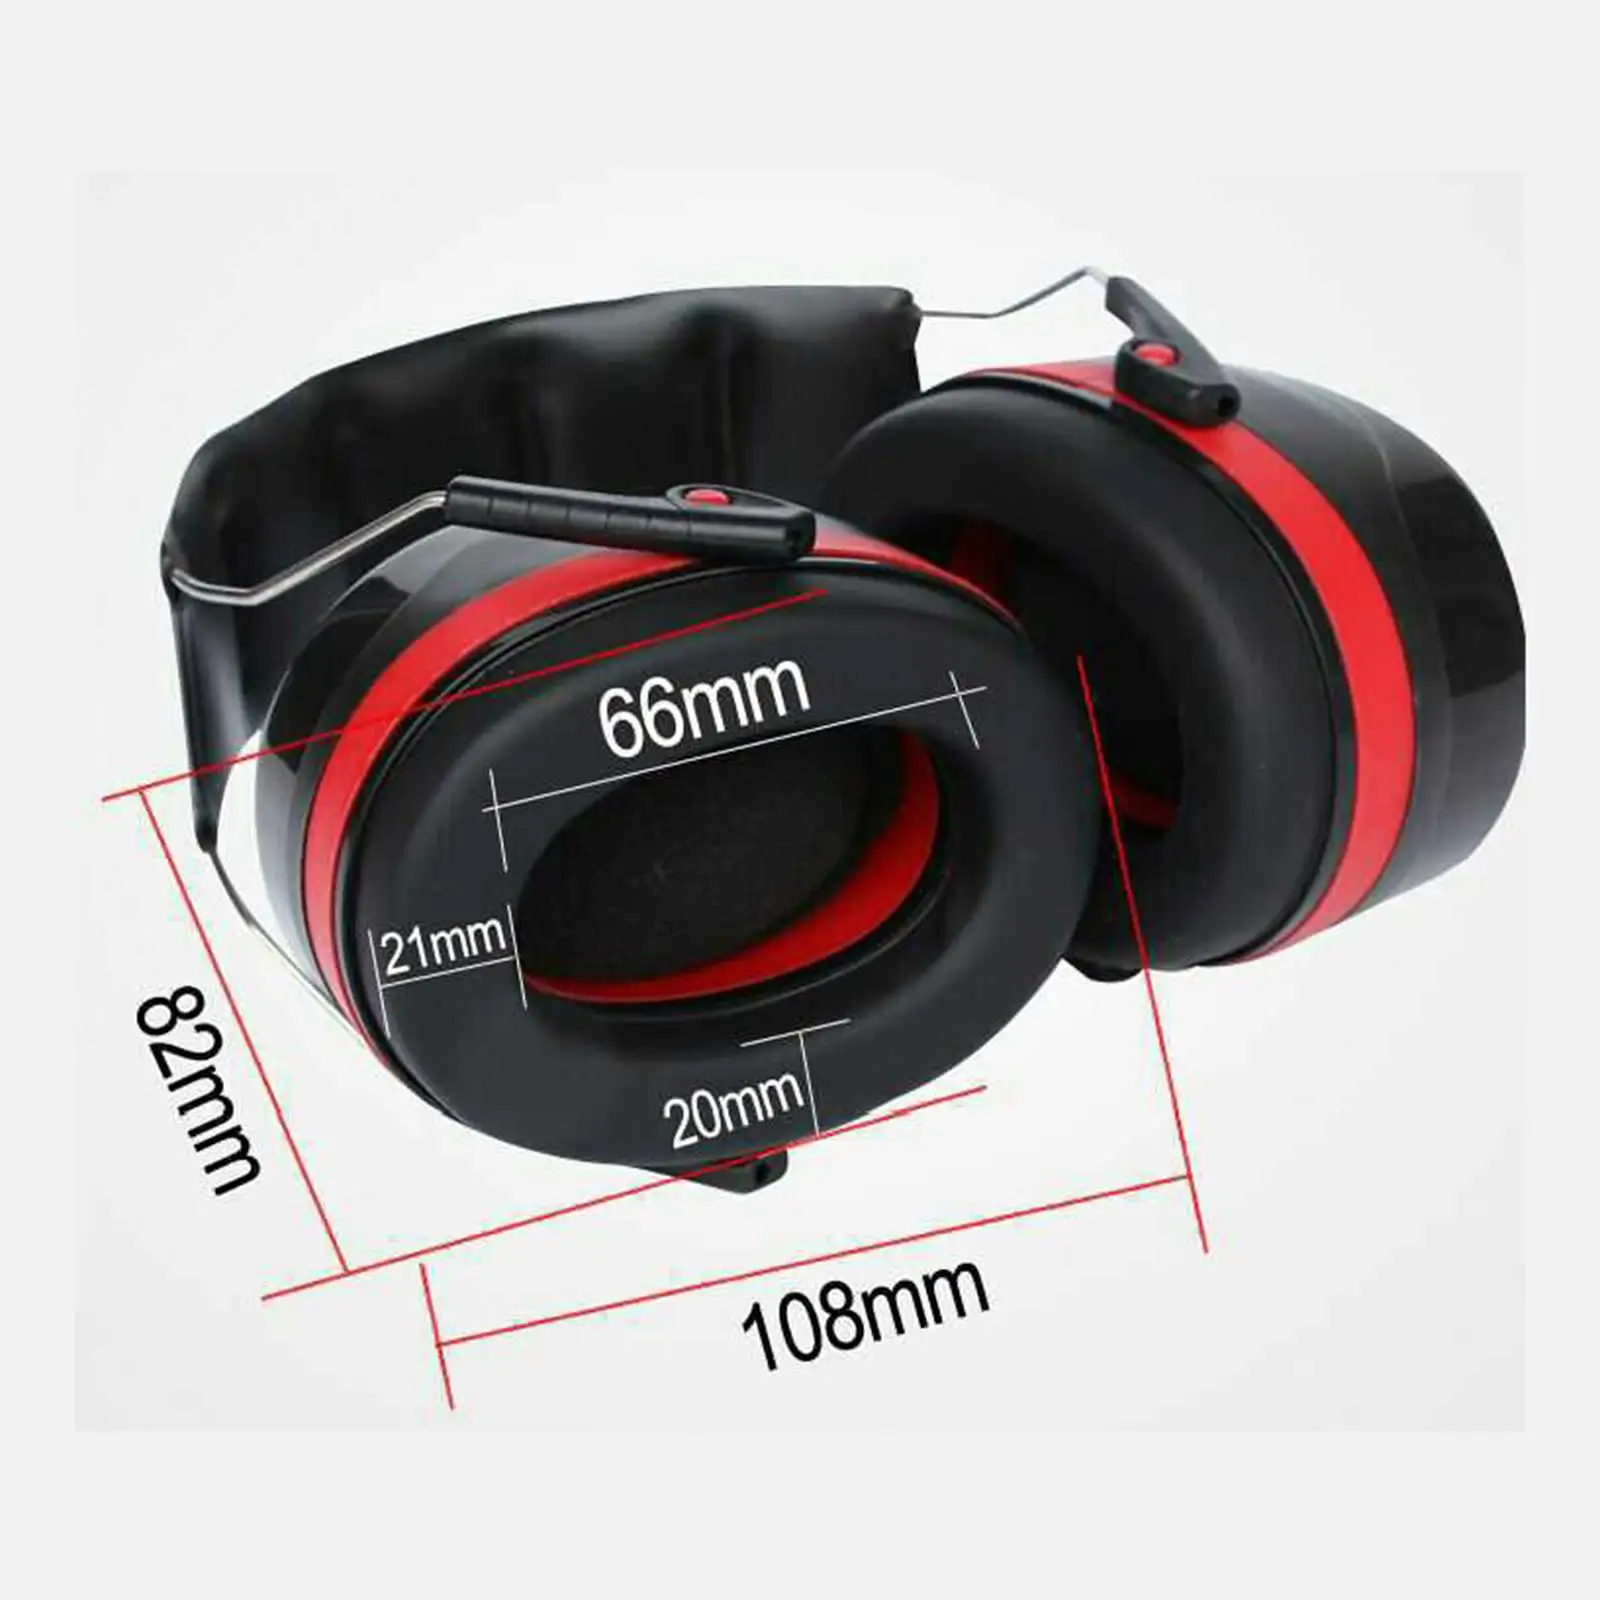 Noise Reduction Headphones Sound Blocking Adjustable Headband Noise Cancelling for Workshop Sleeping Mowing Lawn Study Drum